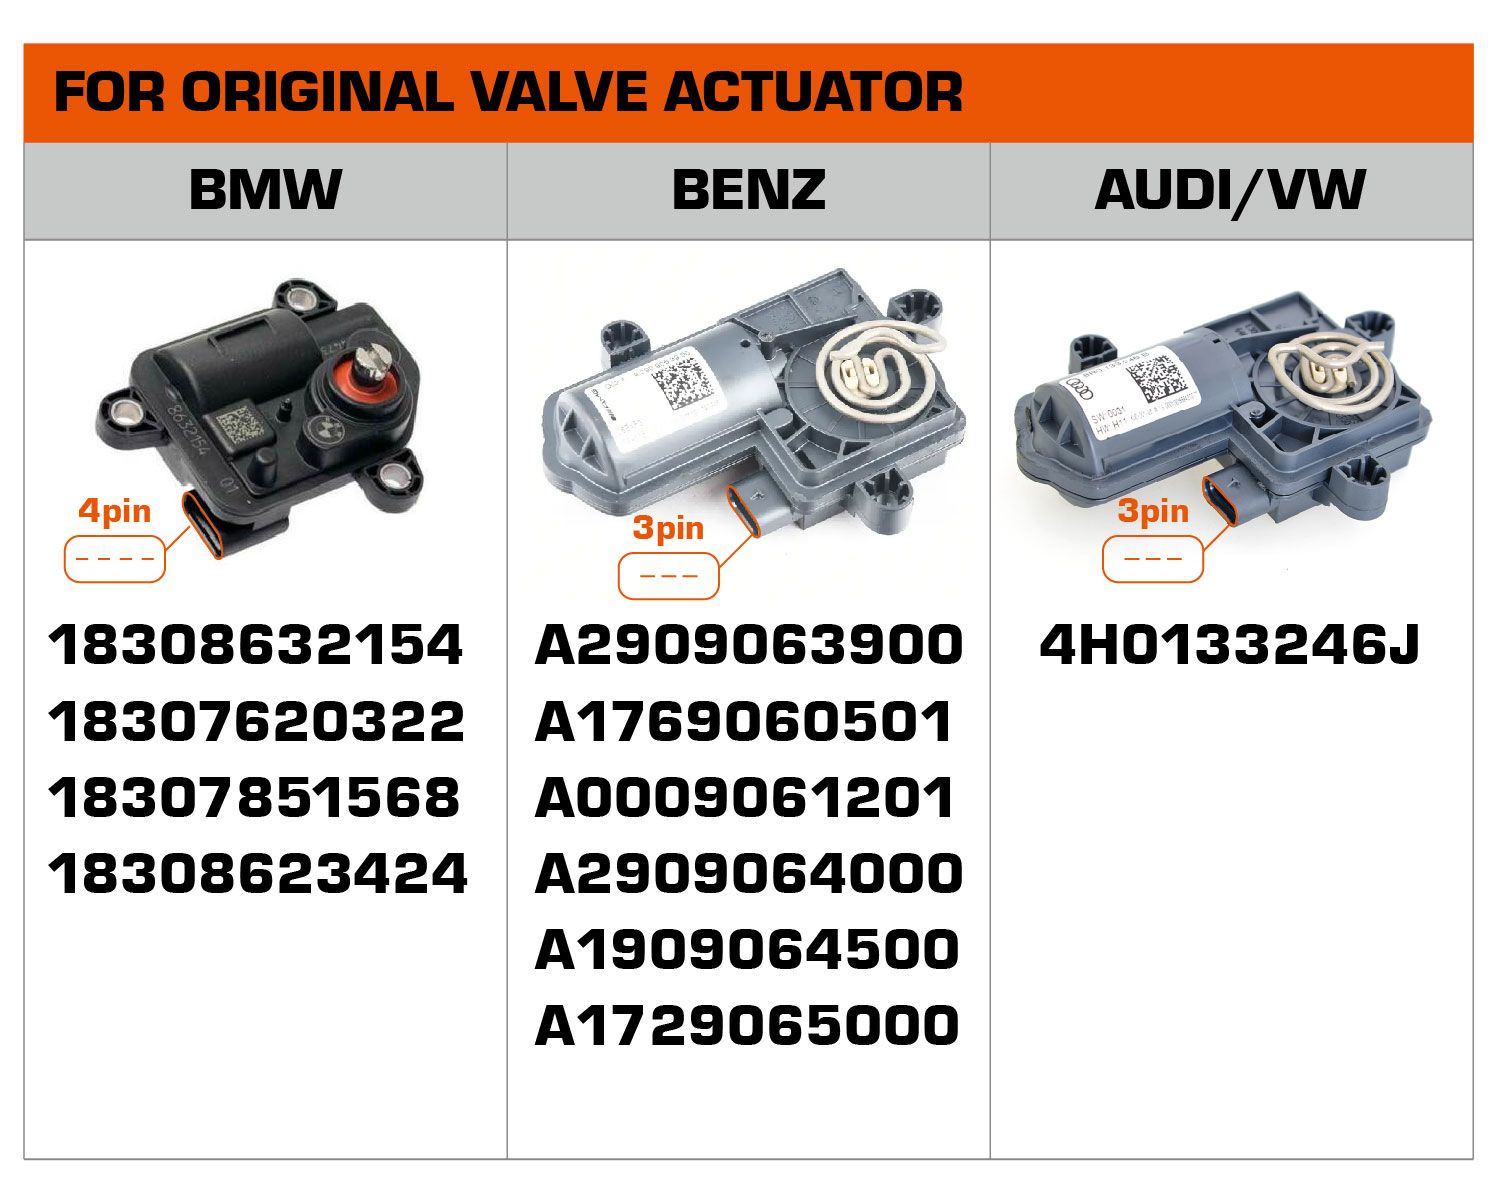 Parts numbers for original valve can use in modified exhaust